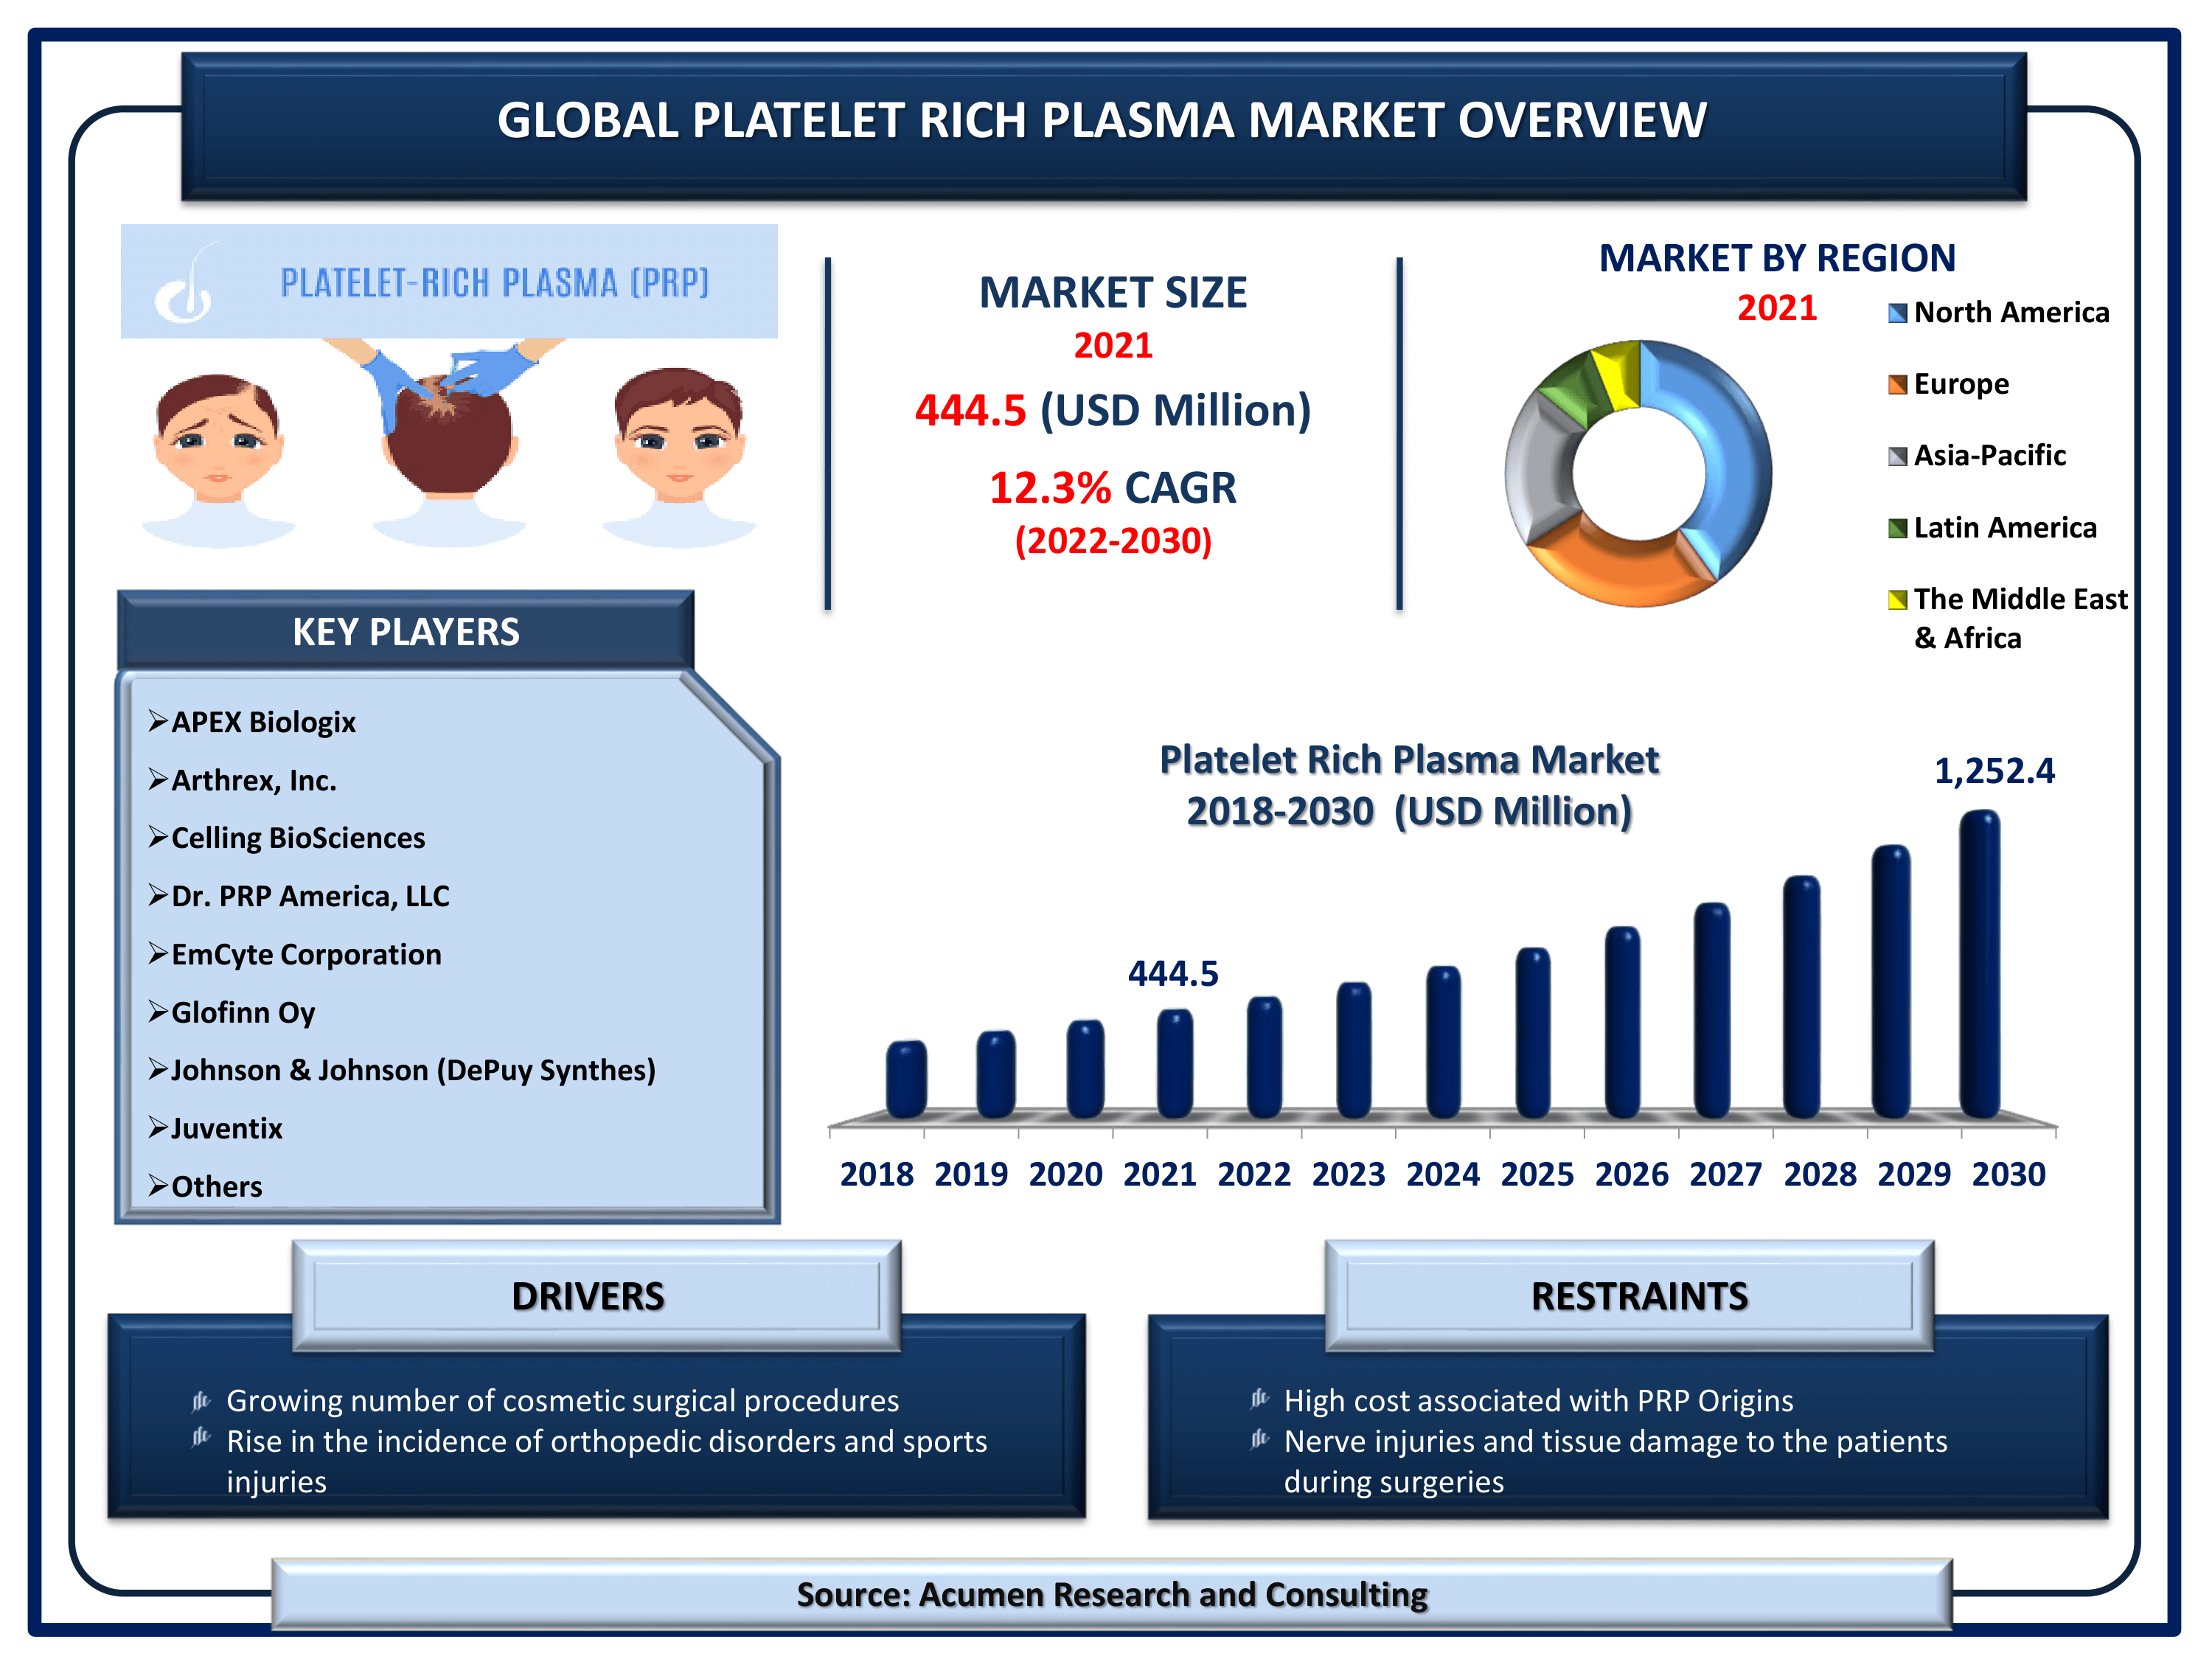 Global platelet rich plasma market revenue is estimated to reach USD 1,252.4 Million by 2030 with a CAGR of 12.3% from 2022 to 2030